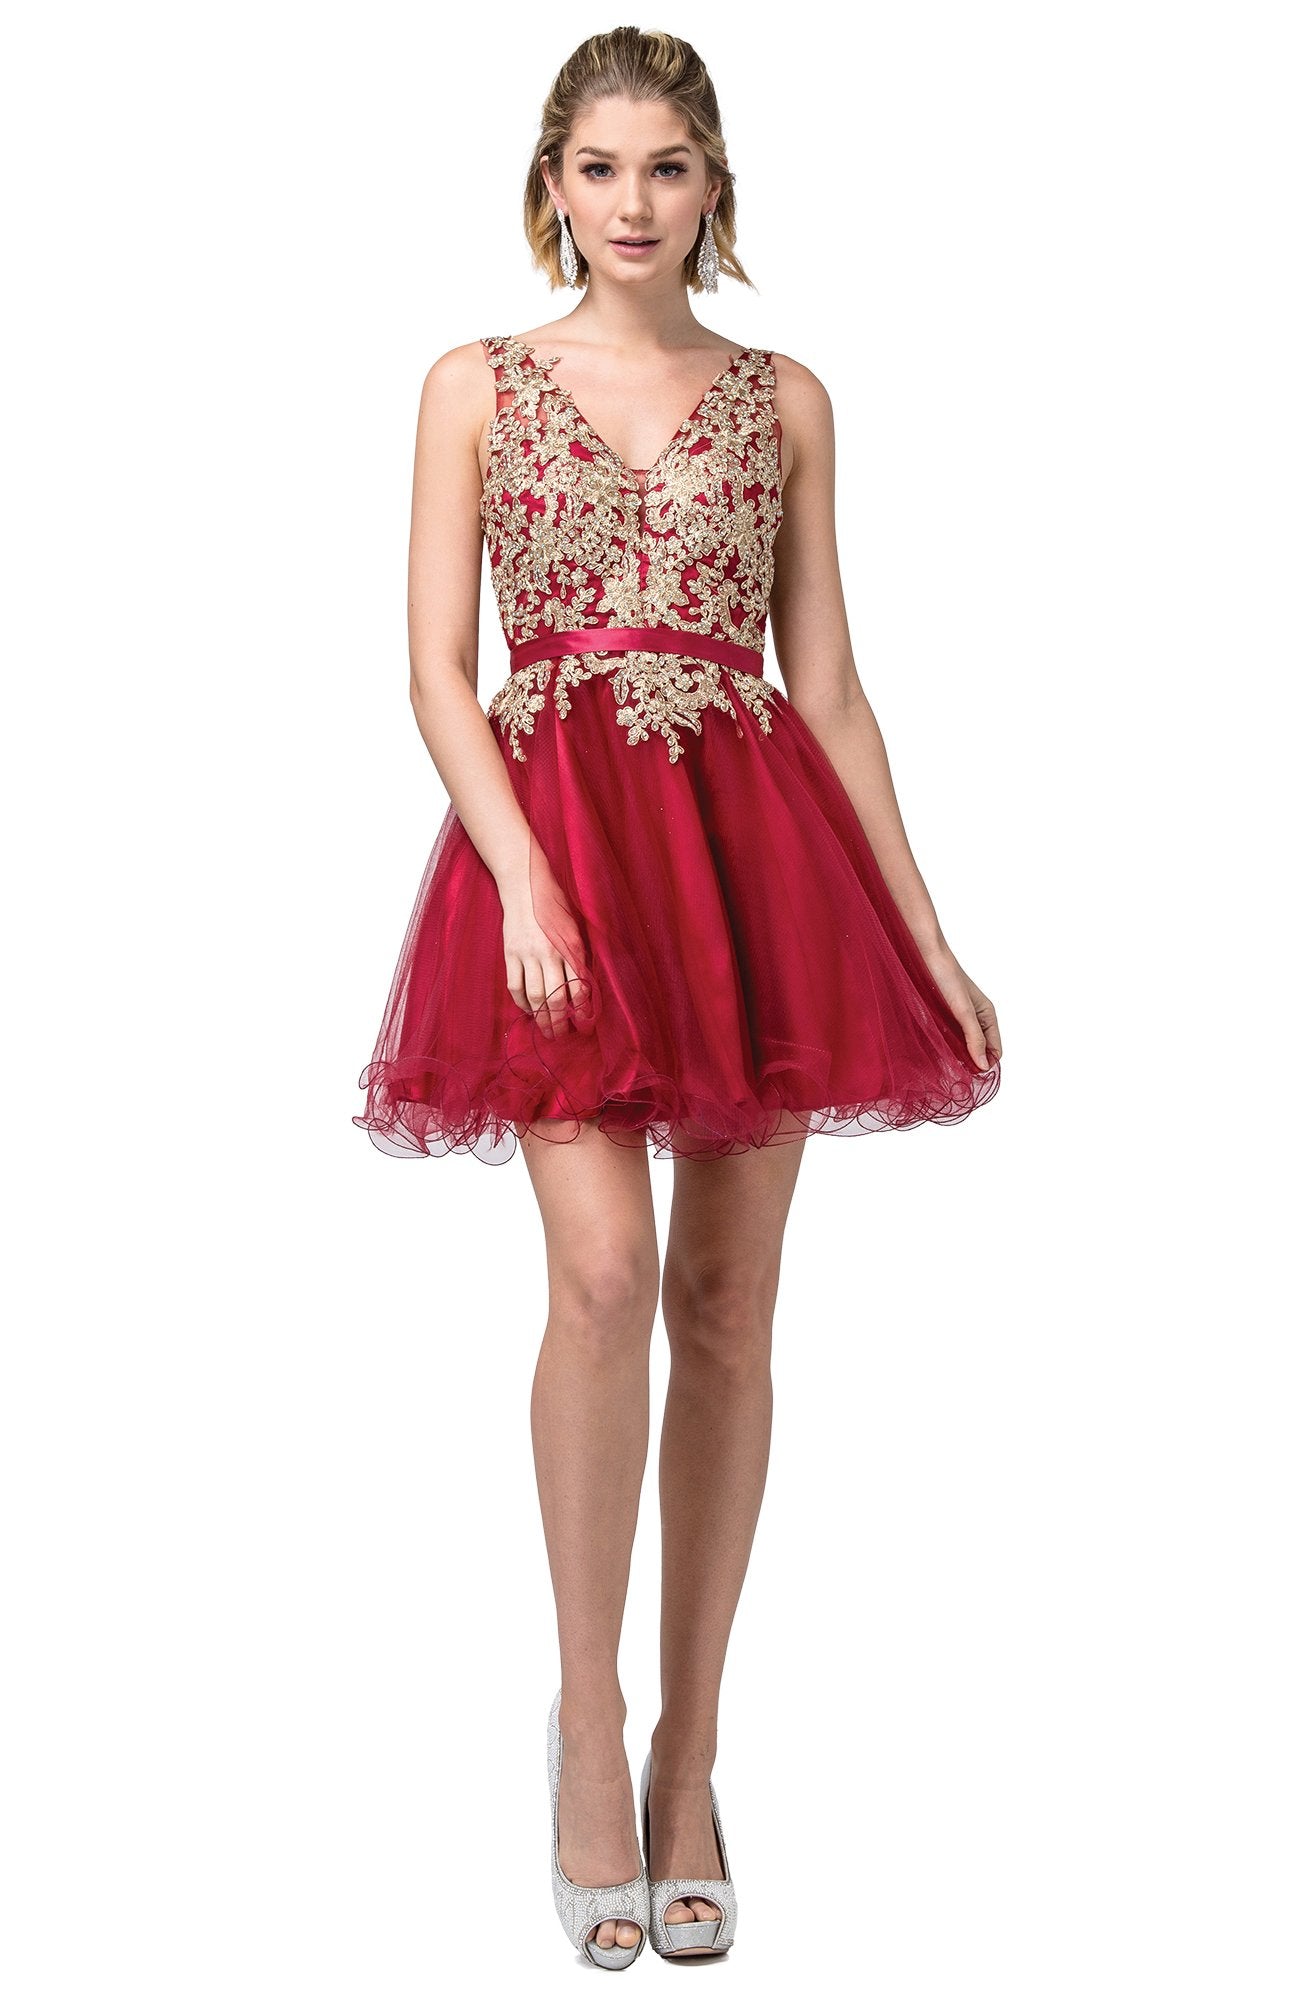 Dancing Queen - 3150 Appliqued Lace Bodice Tulle Dress In Red and Gold